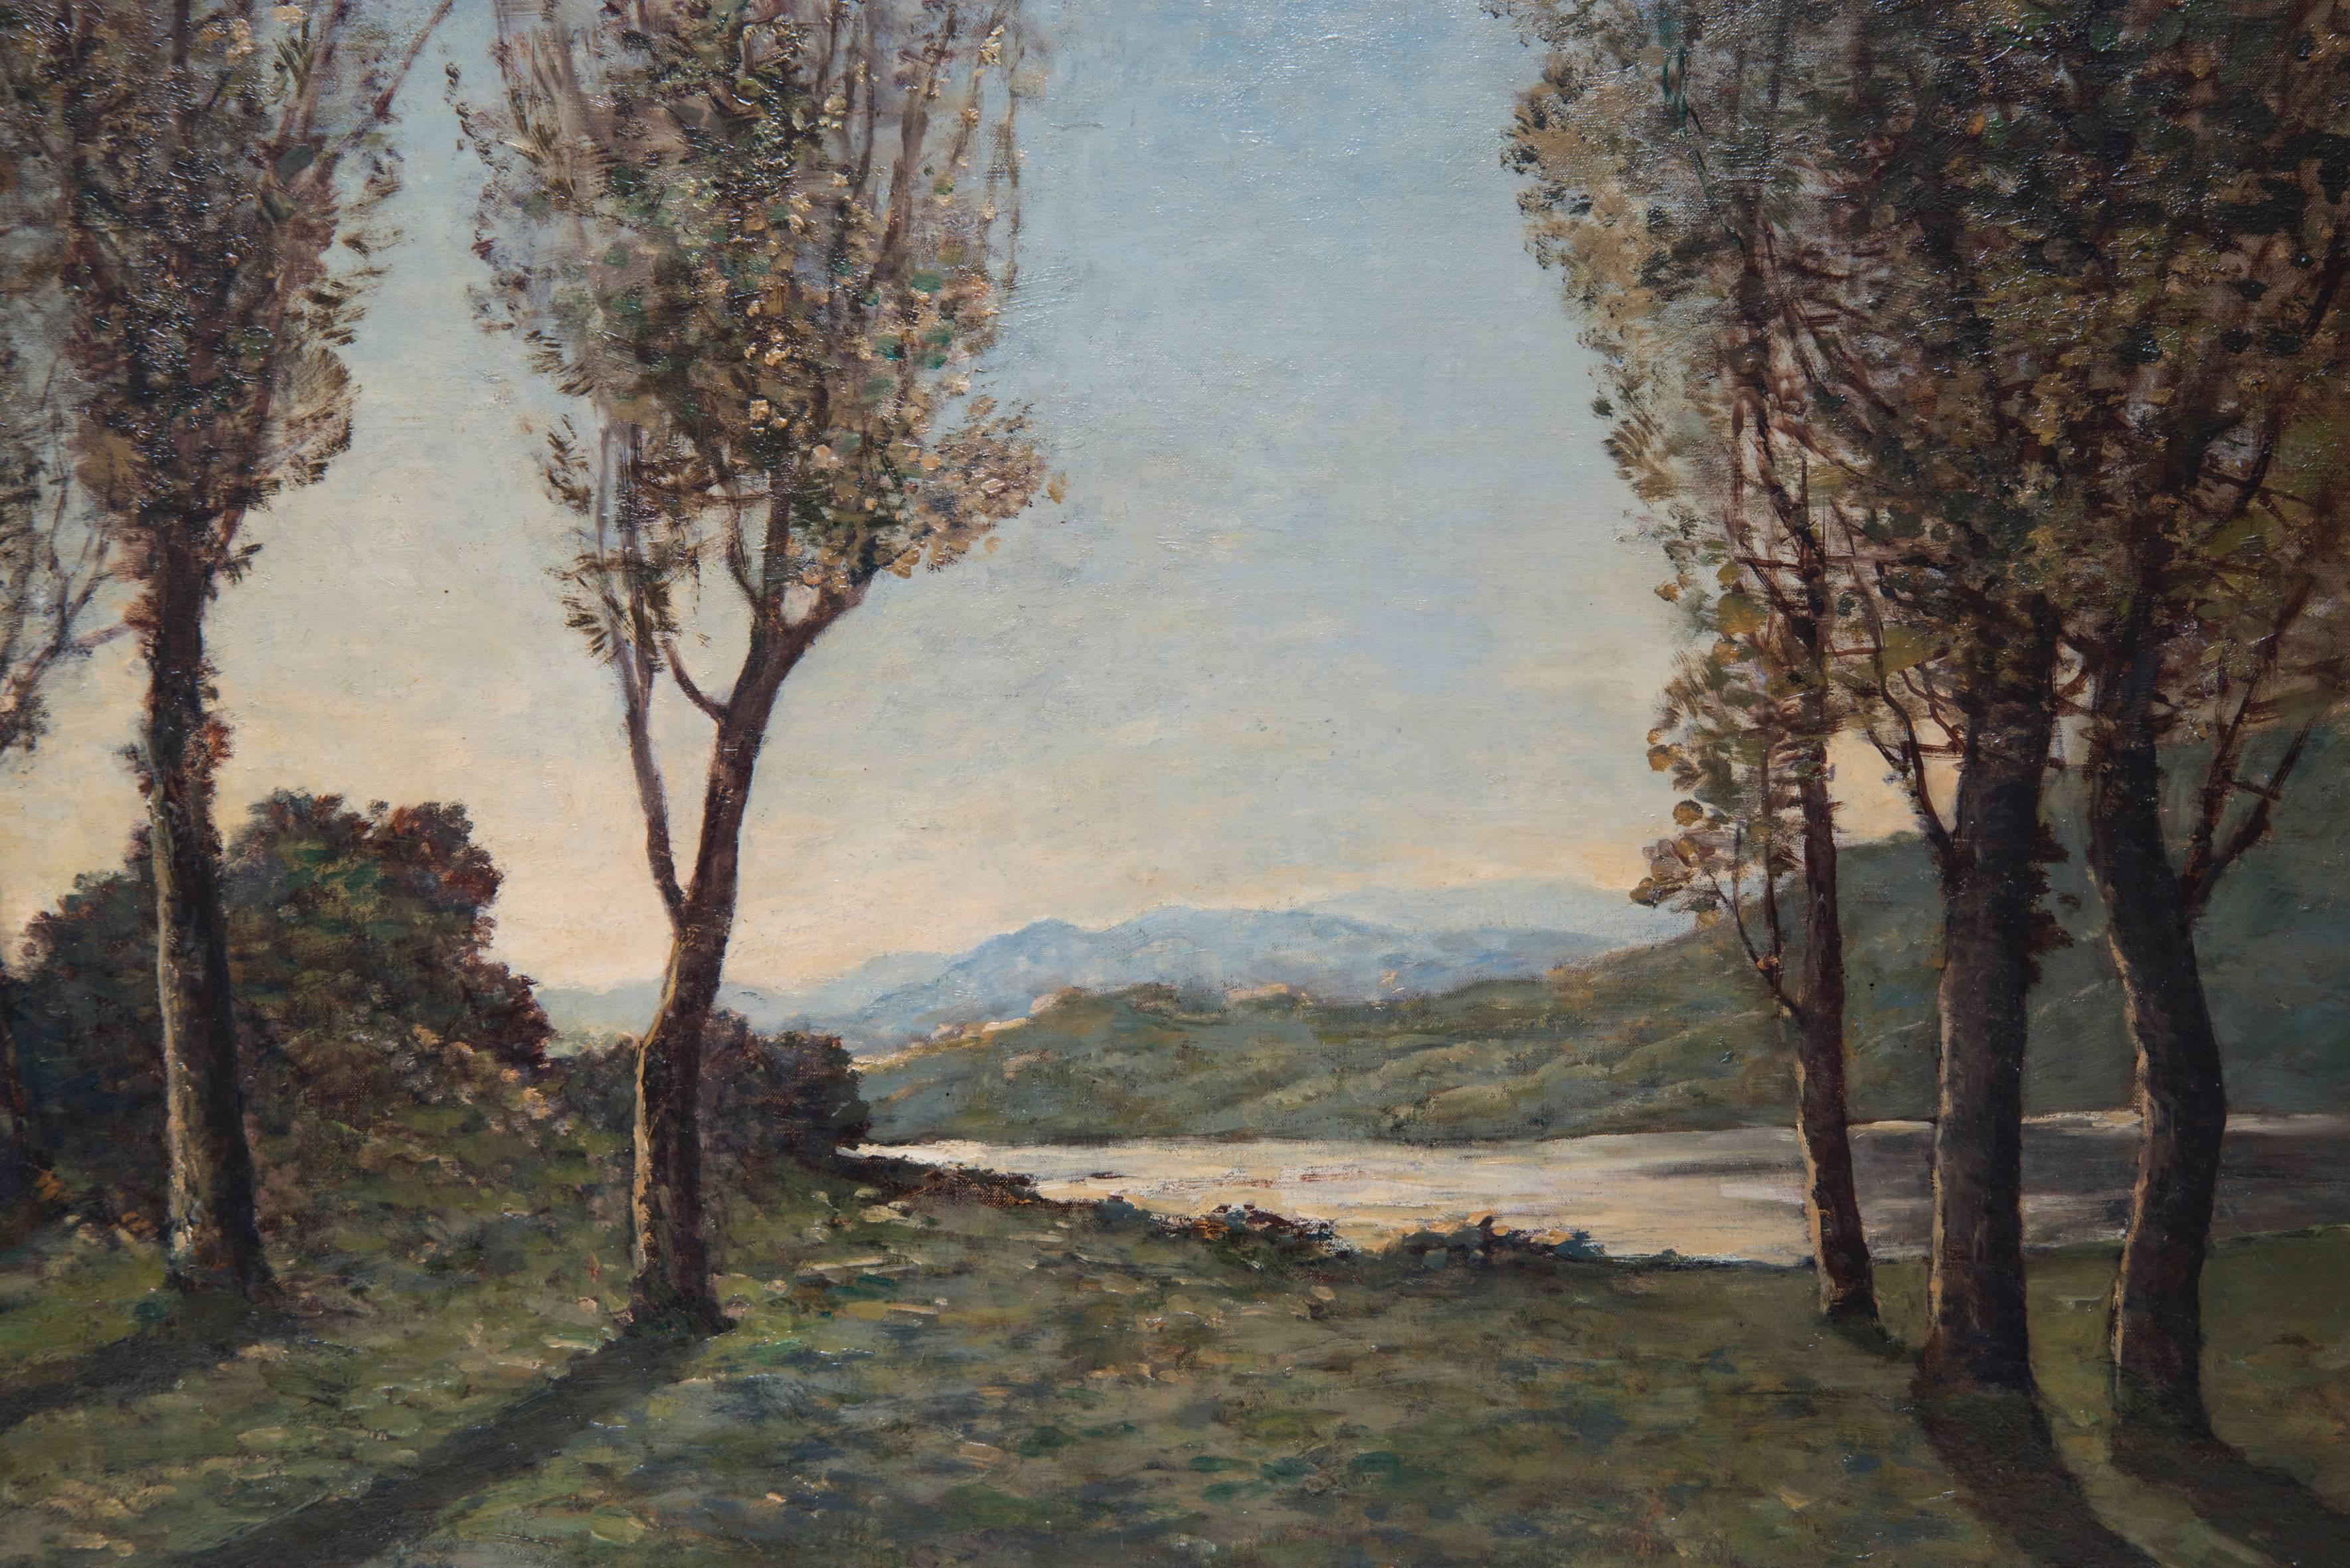 Oil on canvas by Henry Harpignies signed on the lower left and dated 1903.